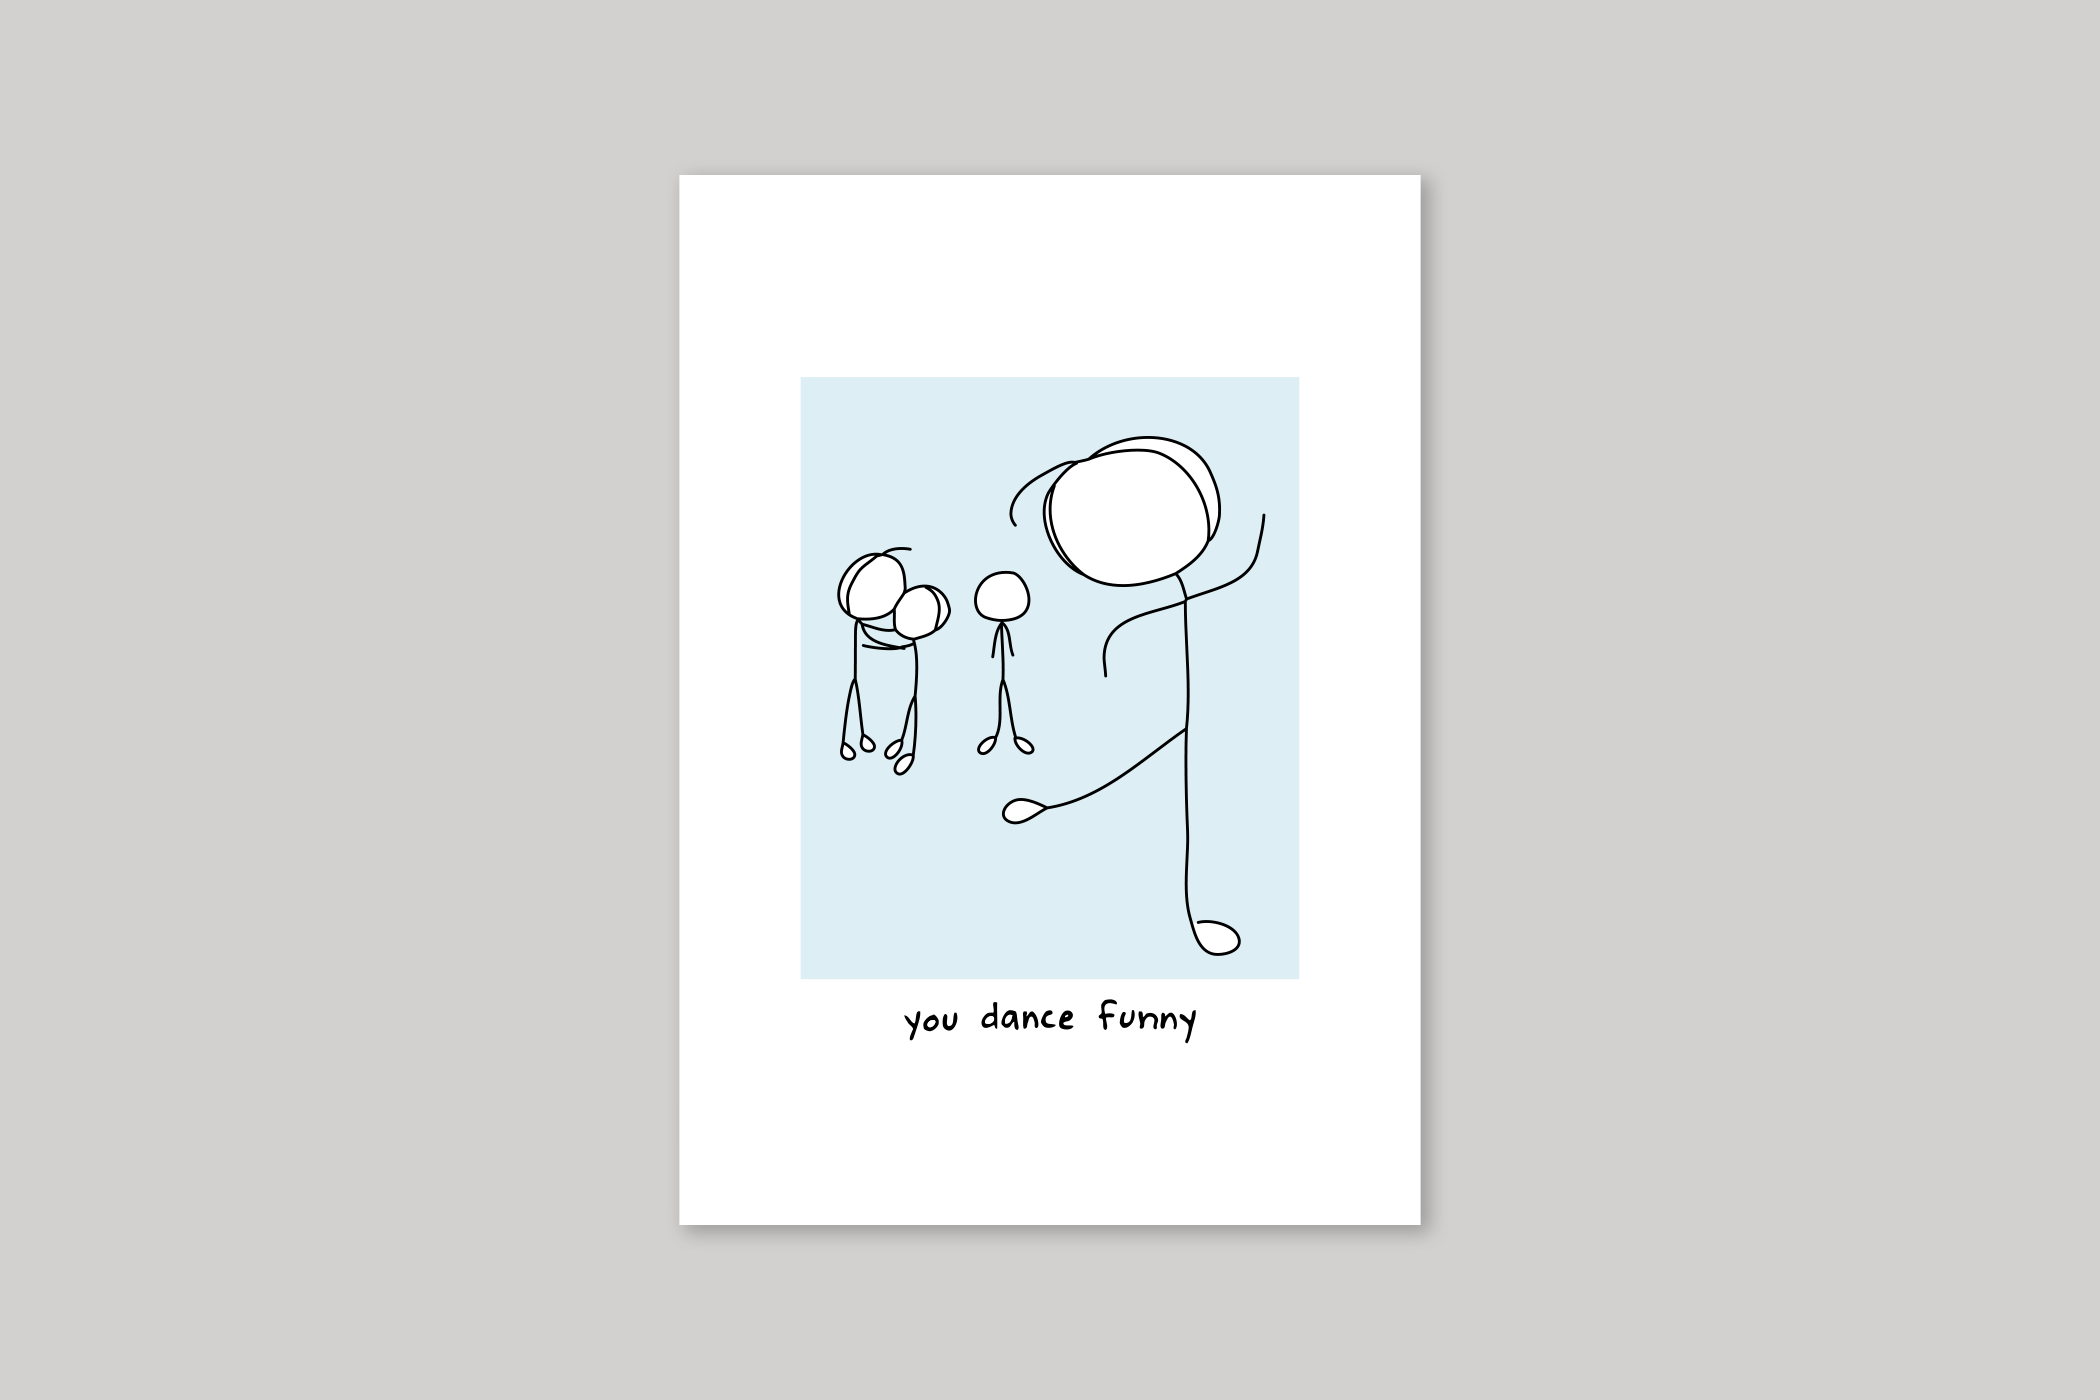 You Dance Funny humorous illustration from Mean Cards range of greeting cards by Icon.